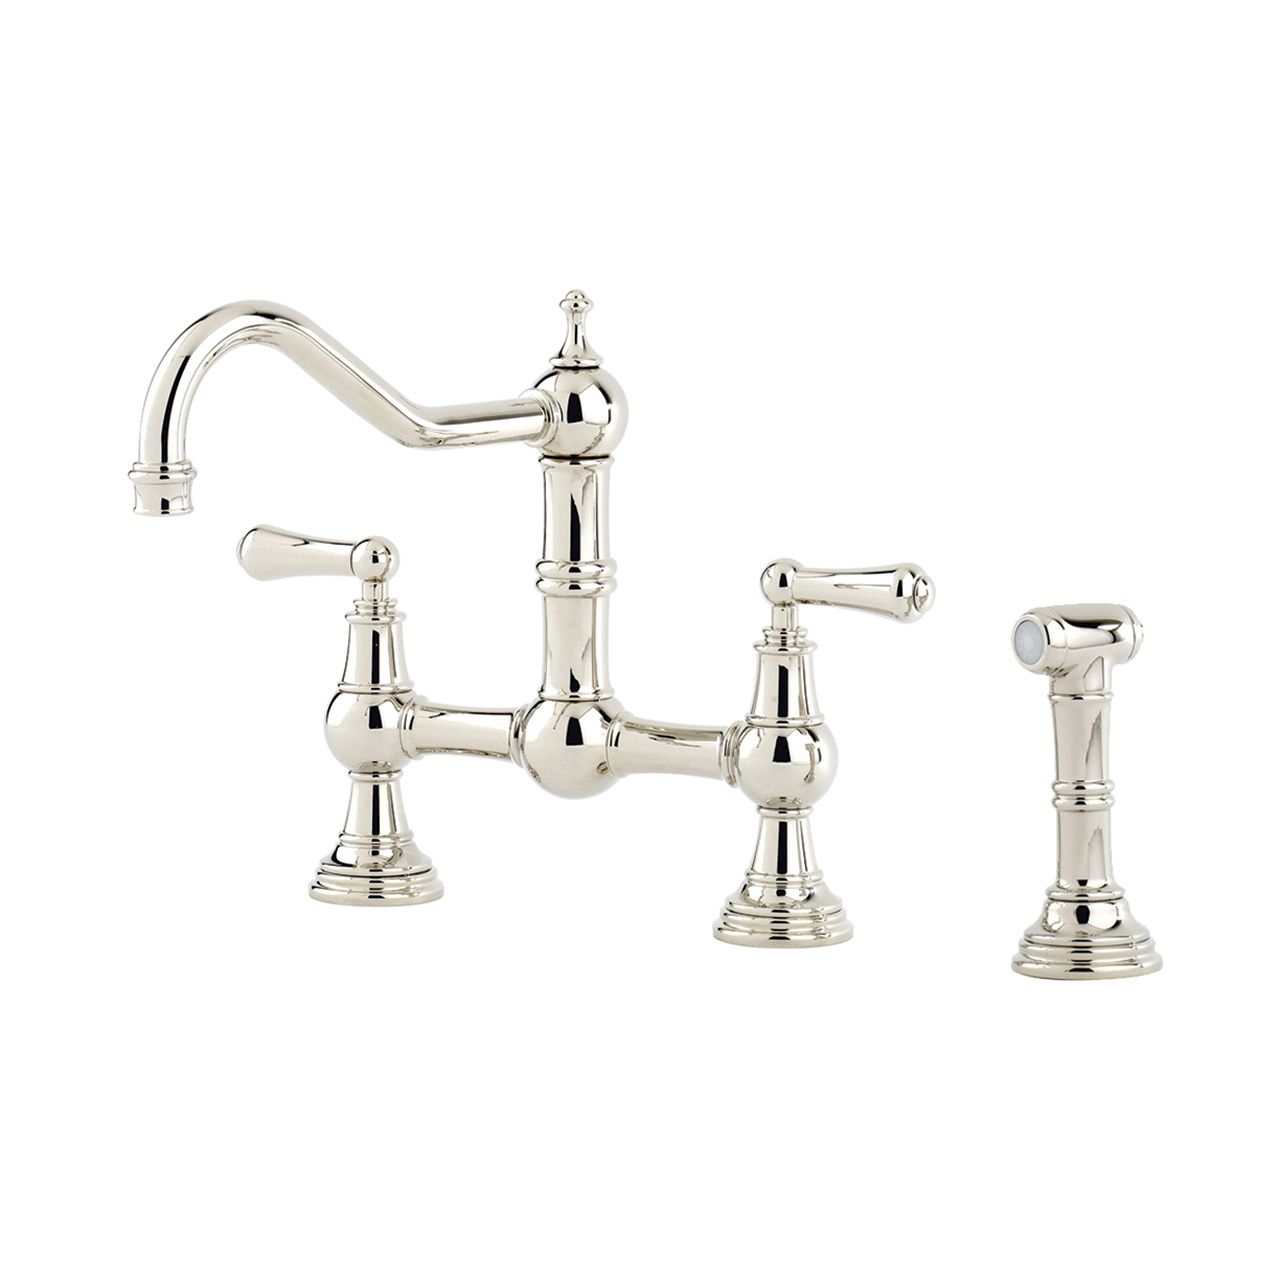 Provence Sink Mixer with Lever Handles and Rinse – Perrin & Rowe